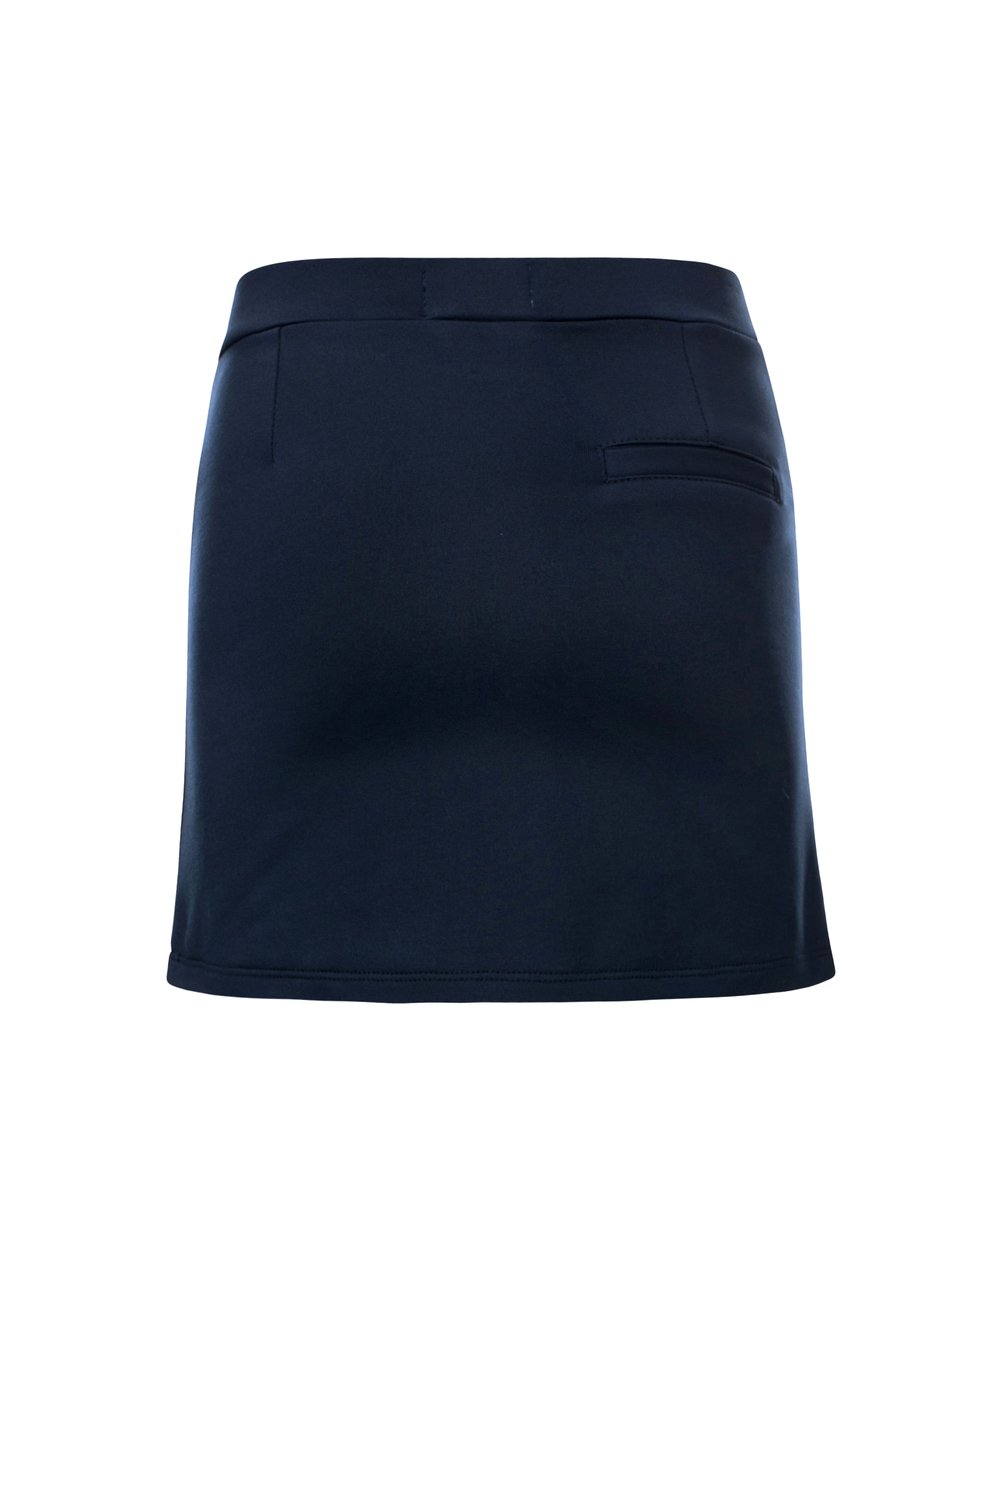 Loox's Revol. Skirt with zip and trim